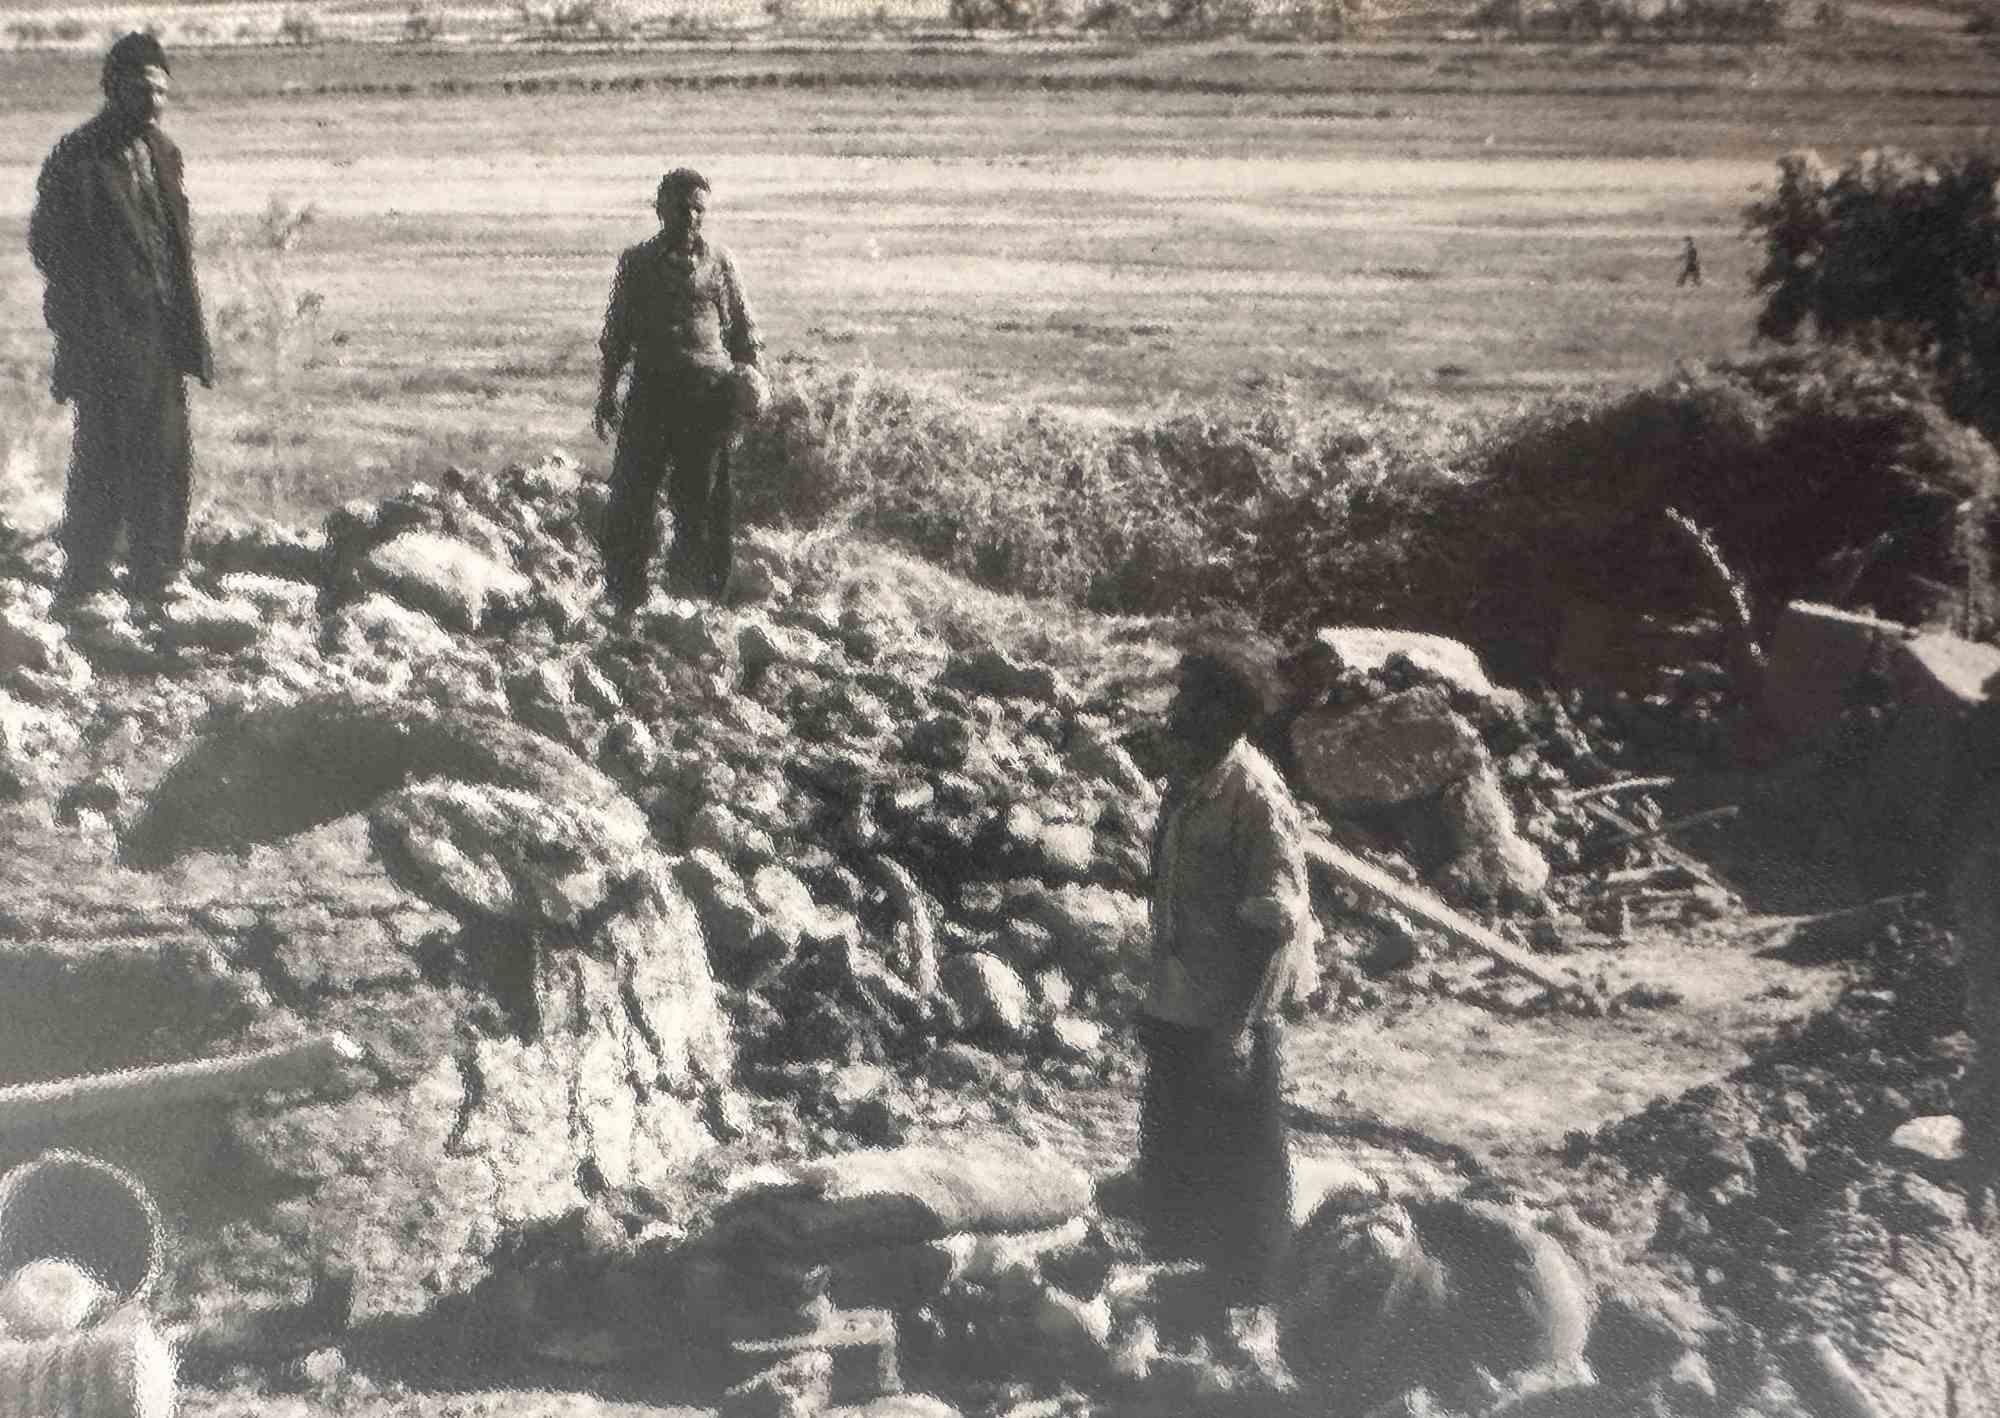 Unknown Figurative Photograph - Old Days - Peasants in Middle-East in mid-20th Century - Vintage Photo